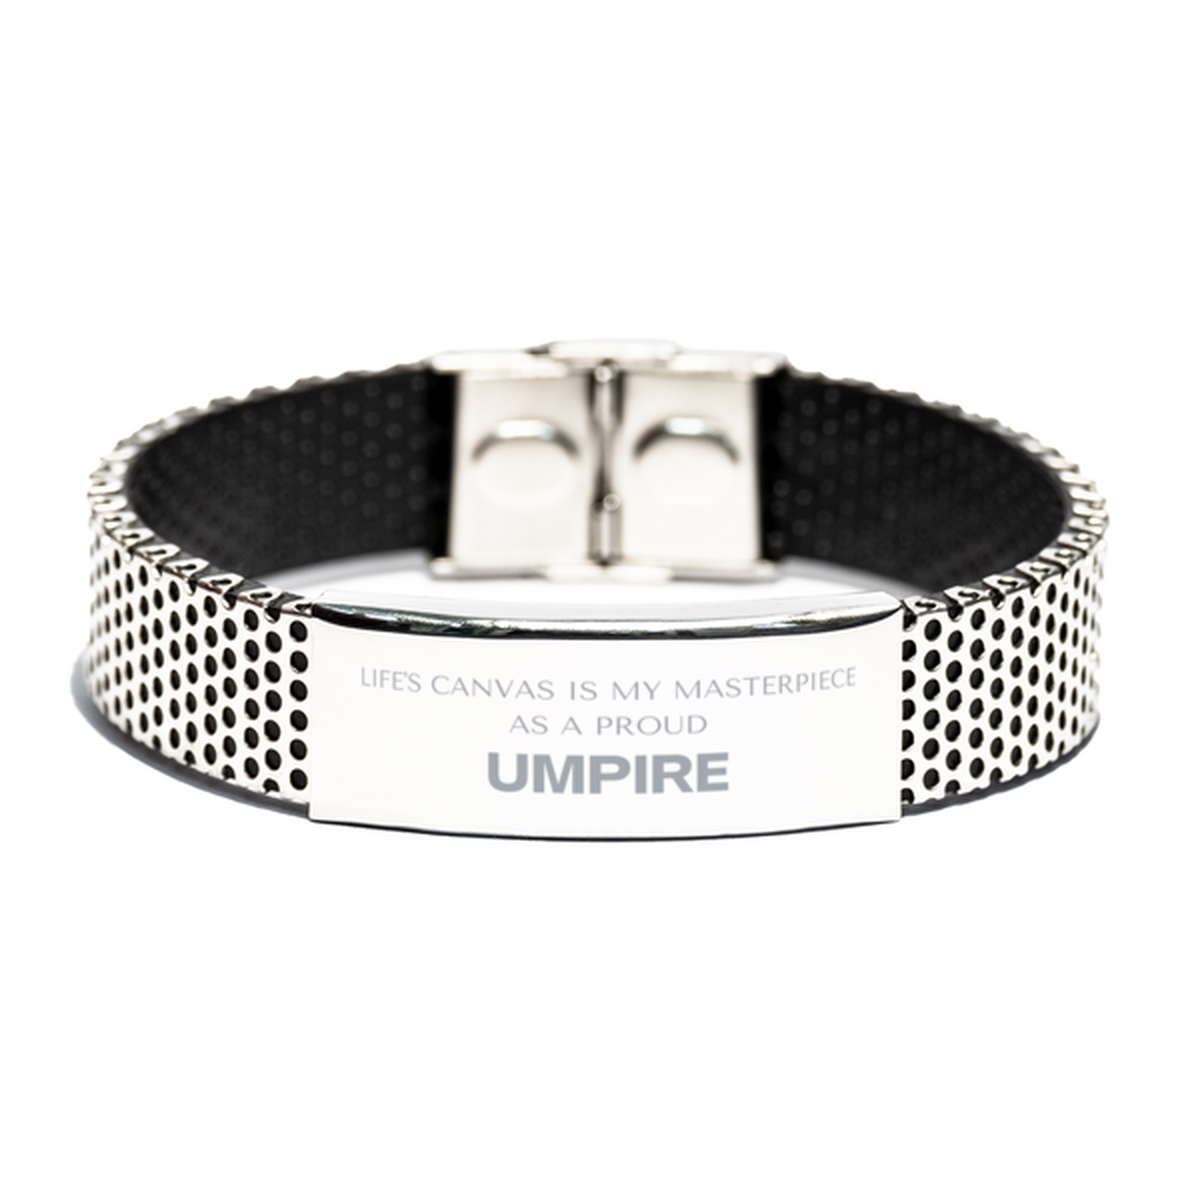 Proud Umpire Gifts, Life's canvas is my masterpiece, Epic Birthday Christmas Unique Stainless Steel Bracelet For Umpire, Coworkers, Men, Women, Friends